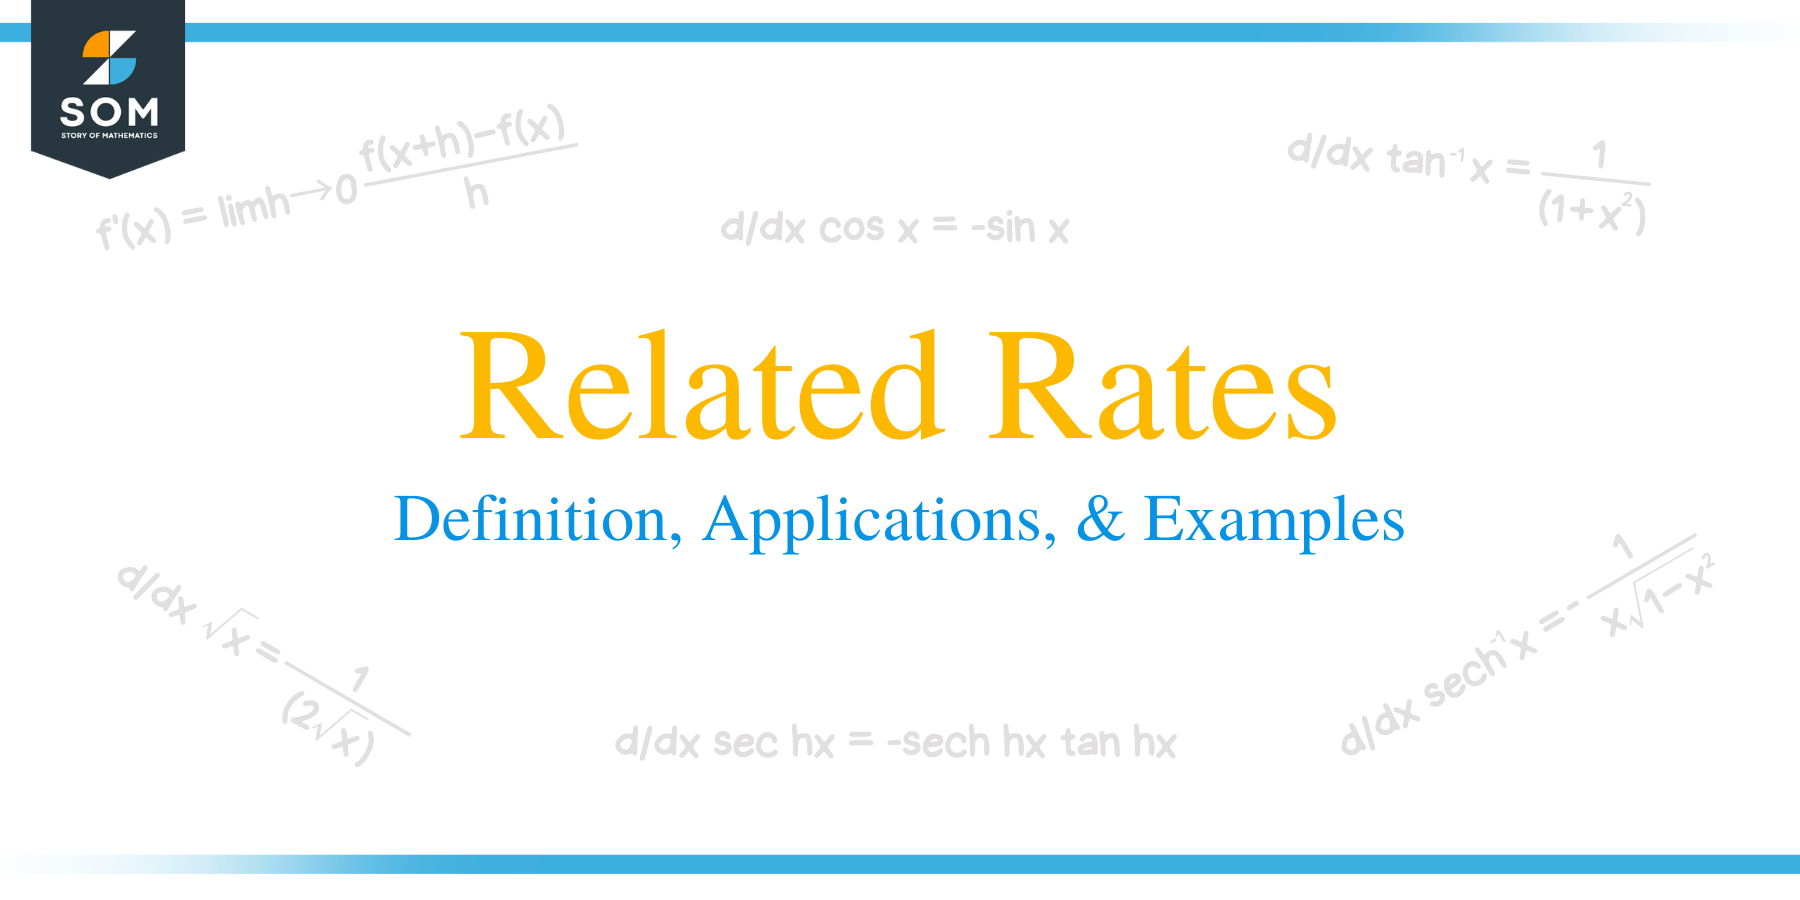 Related rates